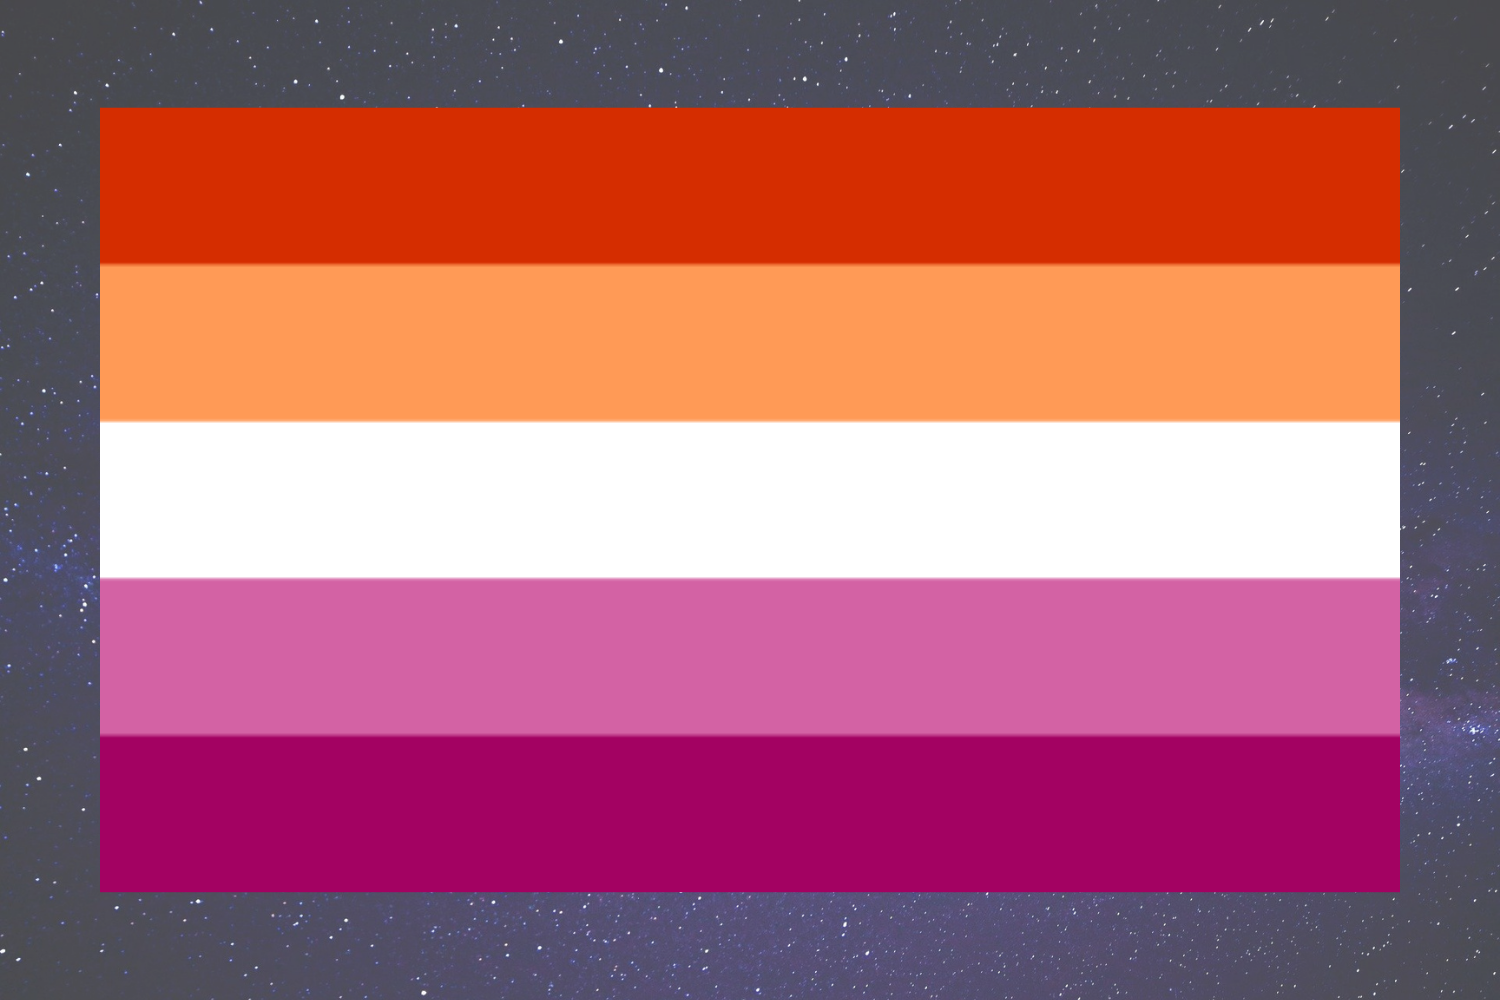 The Lesbian Flag - A flag with 5 horizontal stripes: top to bottom: dark orange, light orange, white, light pink, dark pink. The dark orange represents gender non-conformity and individuality. The orange represents community. The white represents womanhood, as all lesbians are connected to womanhood in some way. The light pink represents serenity and peace. The dark pink represents sex and love. The orange and pink can also be seen to represent butches and femmes respectively.